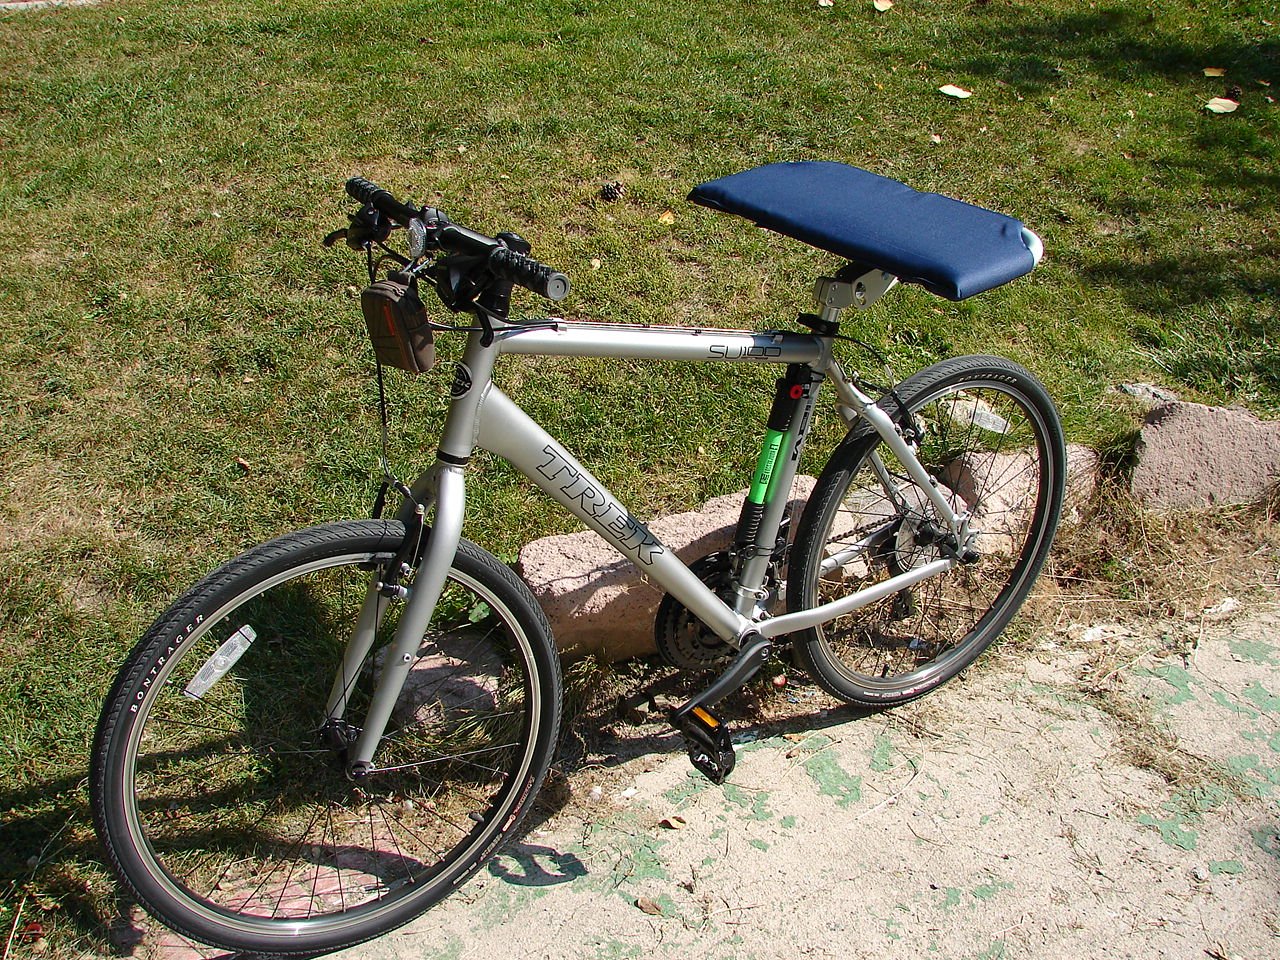 Trek bike with a RealSeat bicycle seat